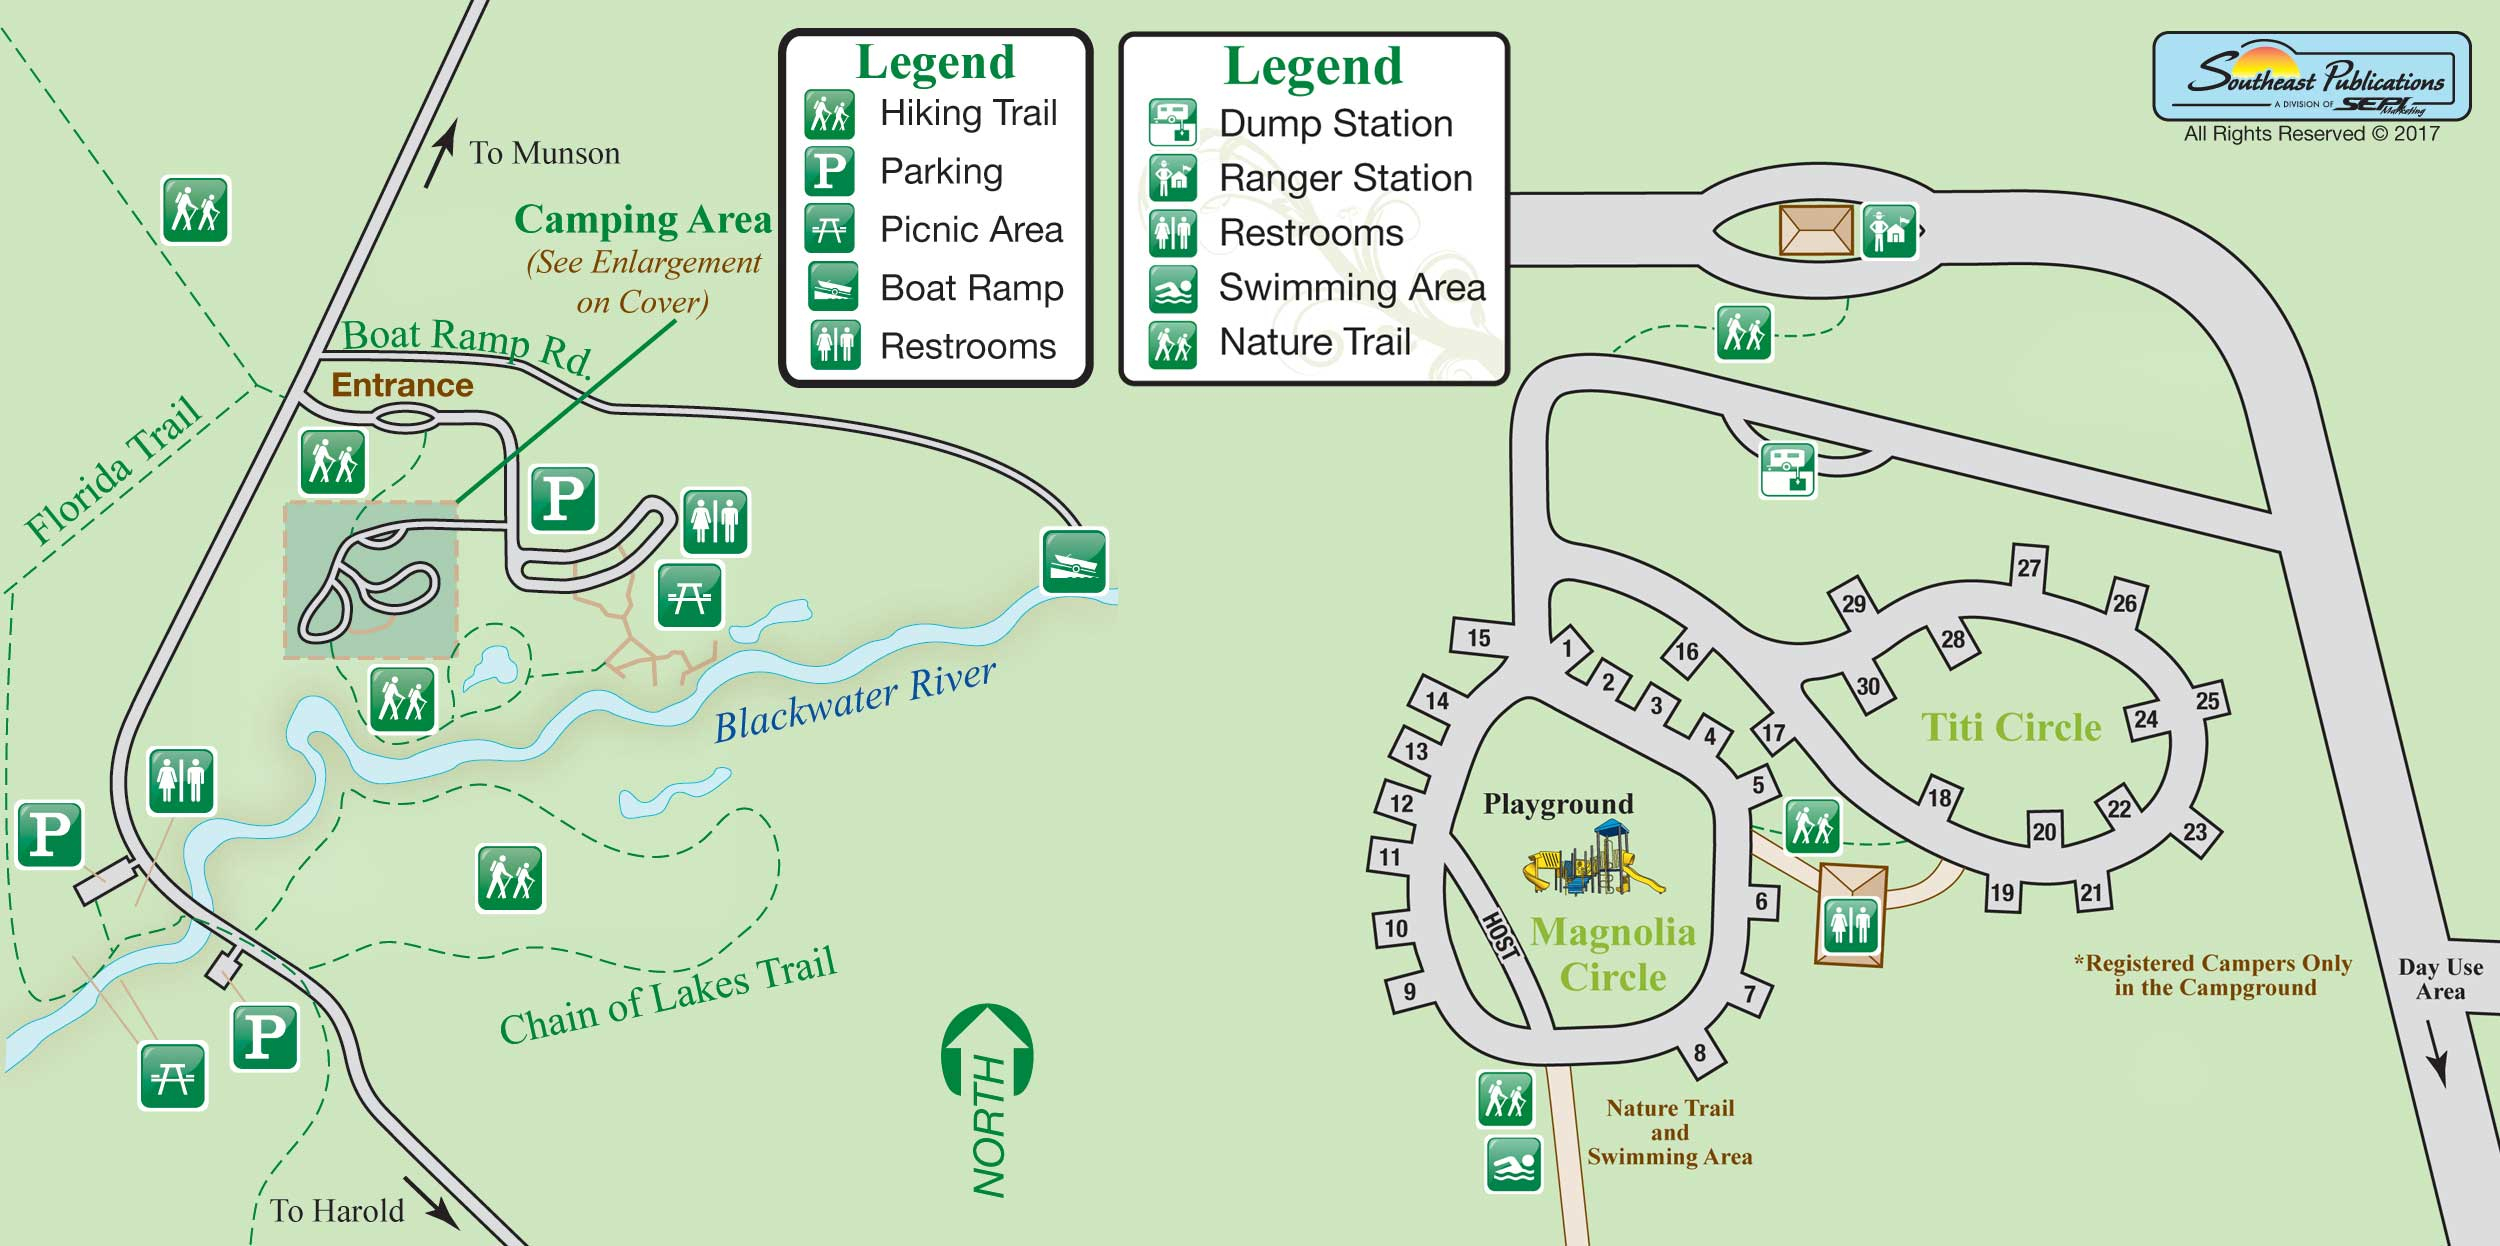 Florida State Parks Rv Camping - Know Your Campground - Florida Rv Camping Map